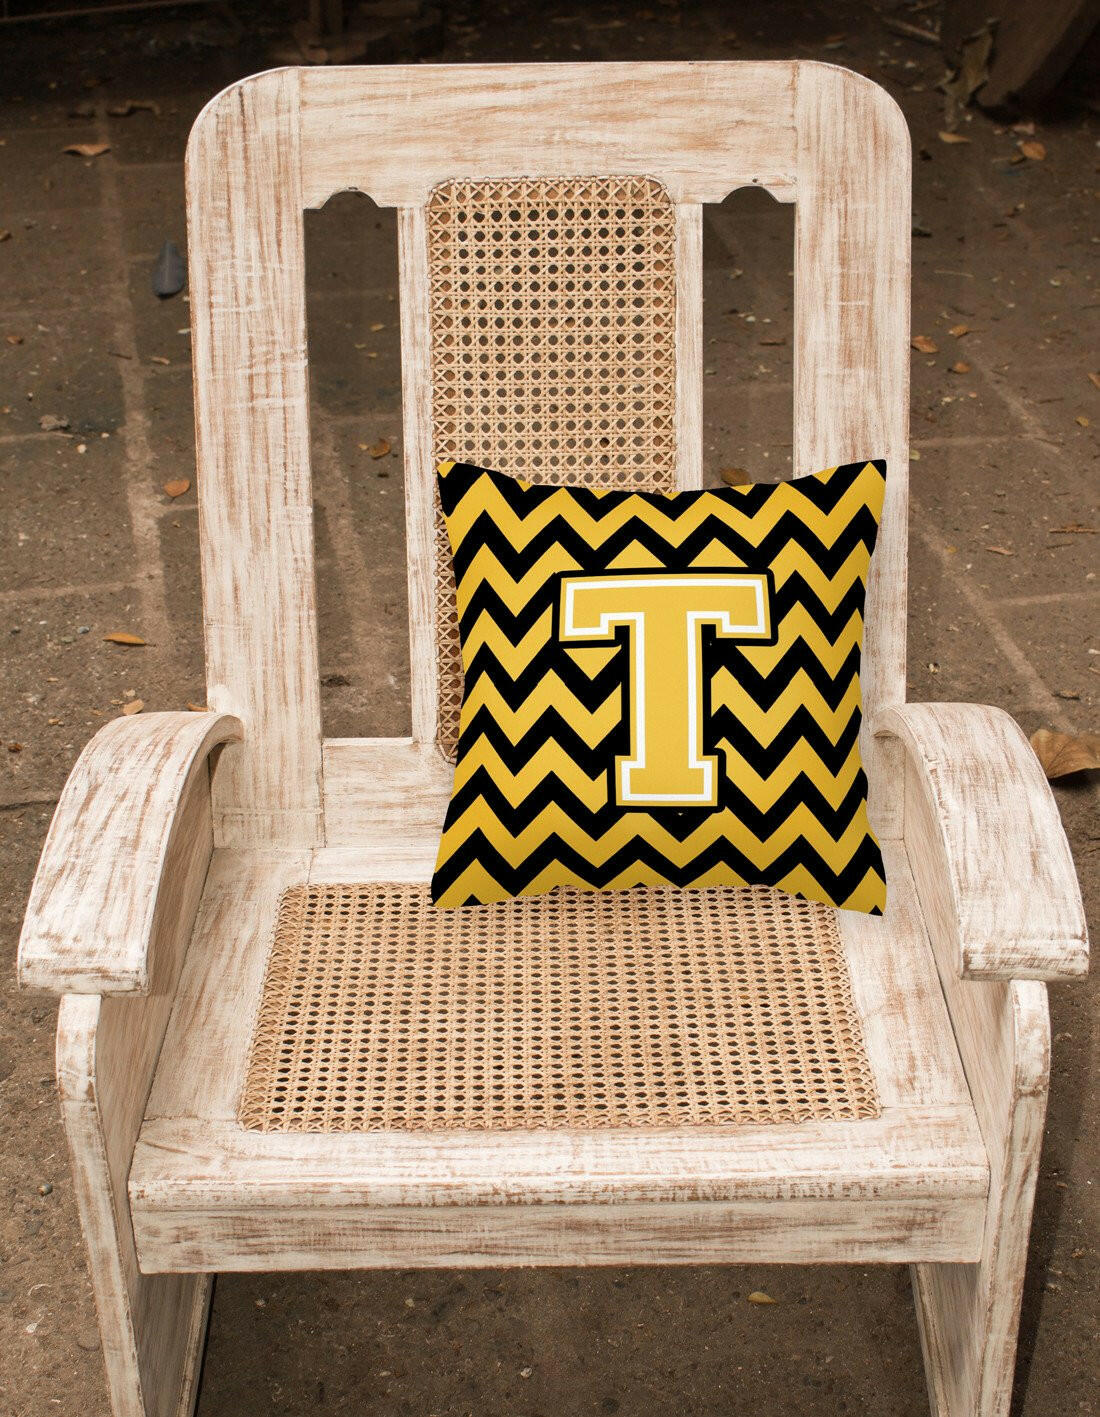 Letter T Chevron Black and Gold Fabric Decorative Pillow CJ1053-TPW1414 by Caroline's Treasures